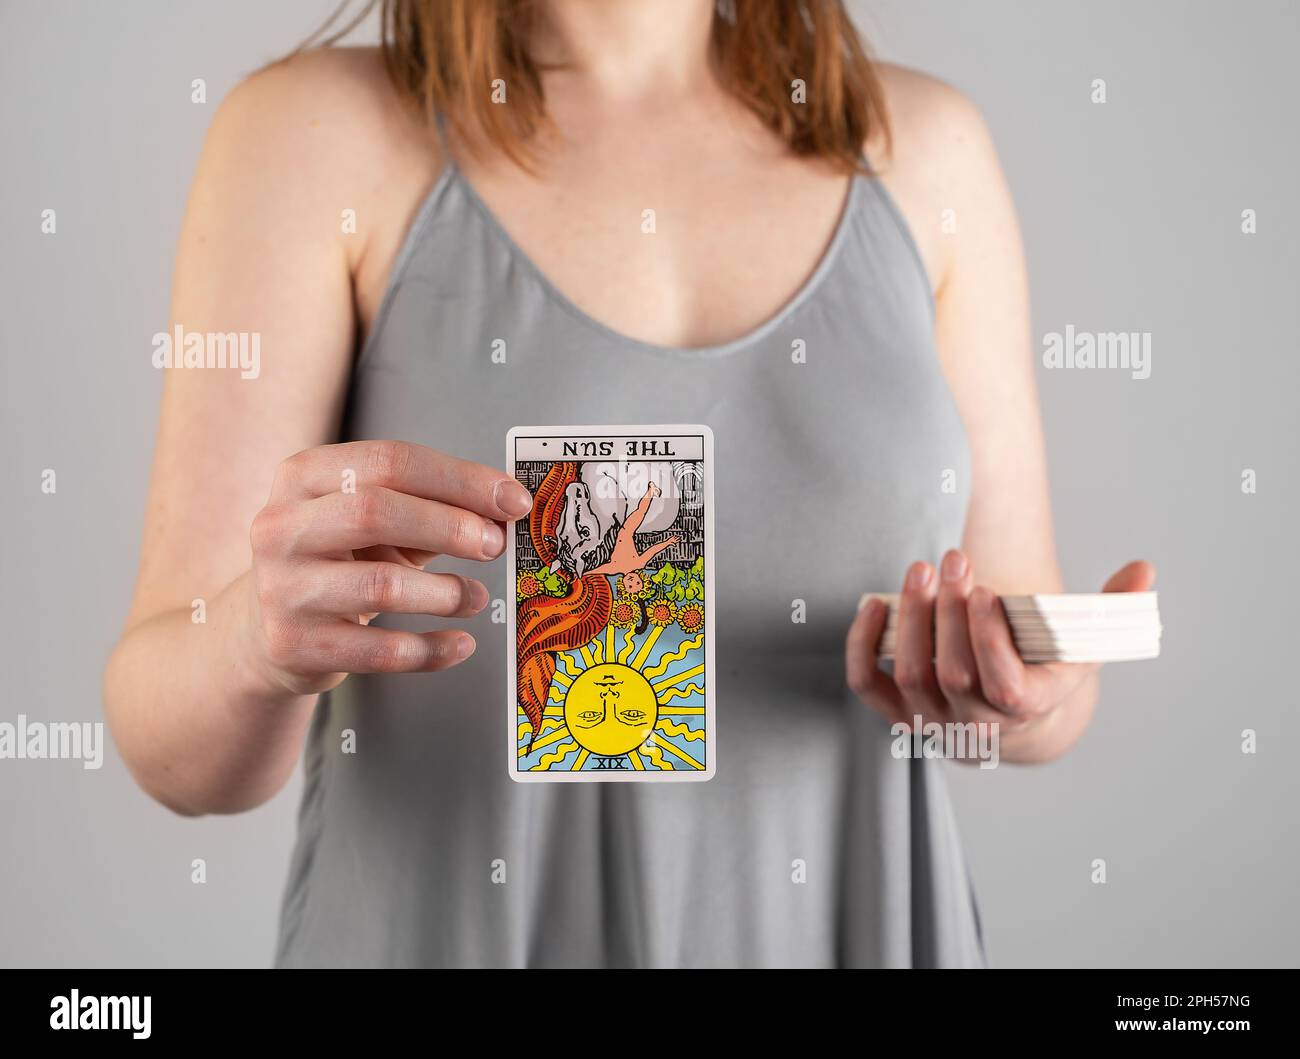 Reversed tarot card The Sun in hand fortune-teller. Divination concept. Stock Photo